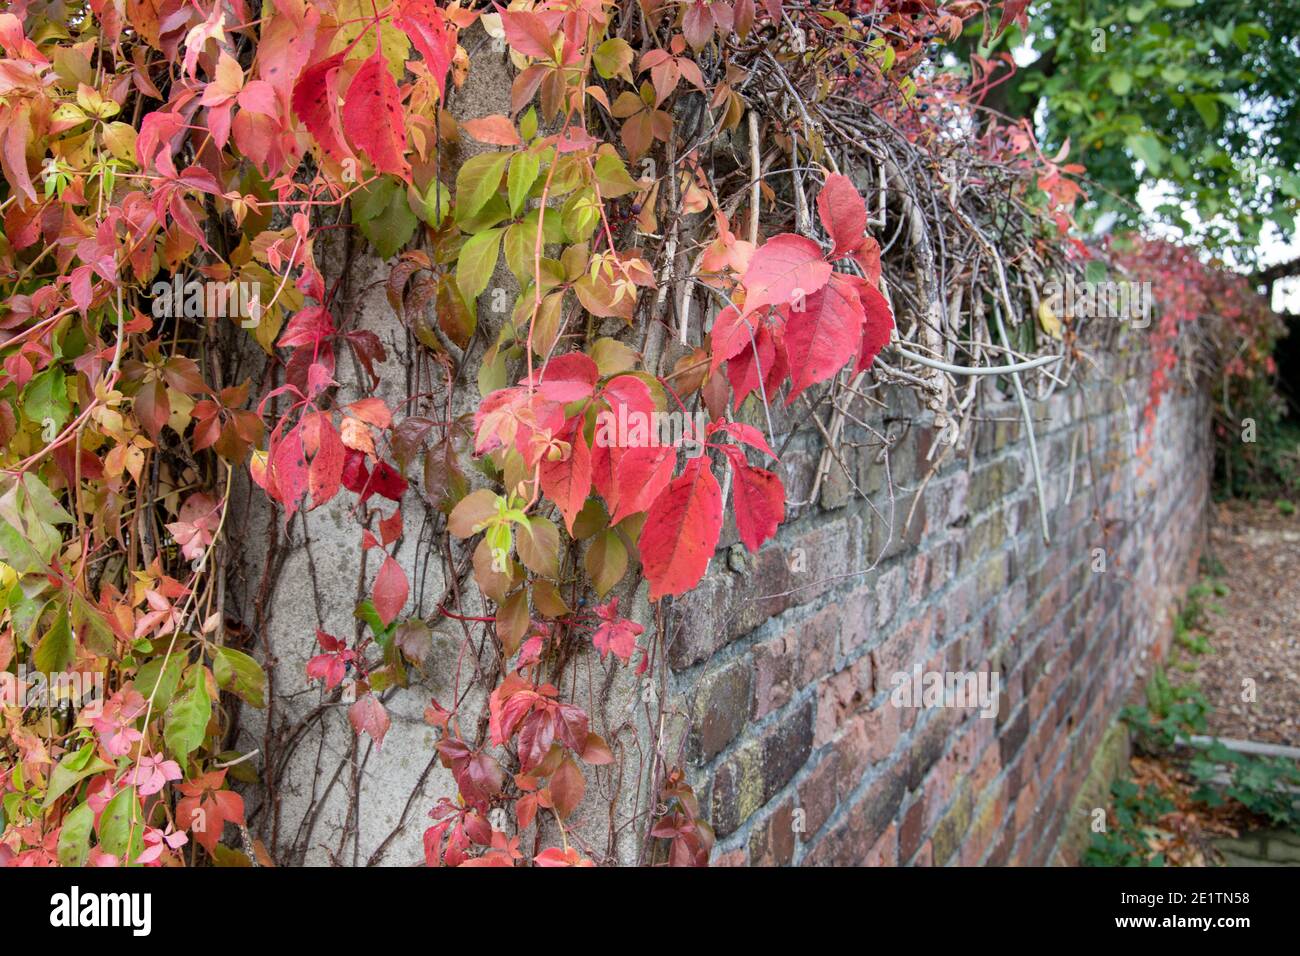 The brick wall is overgrown with wild vines. The leaves are colorful in autumn. Stock Photo